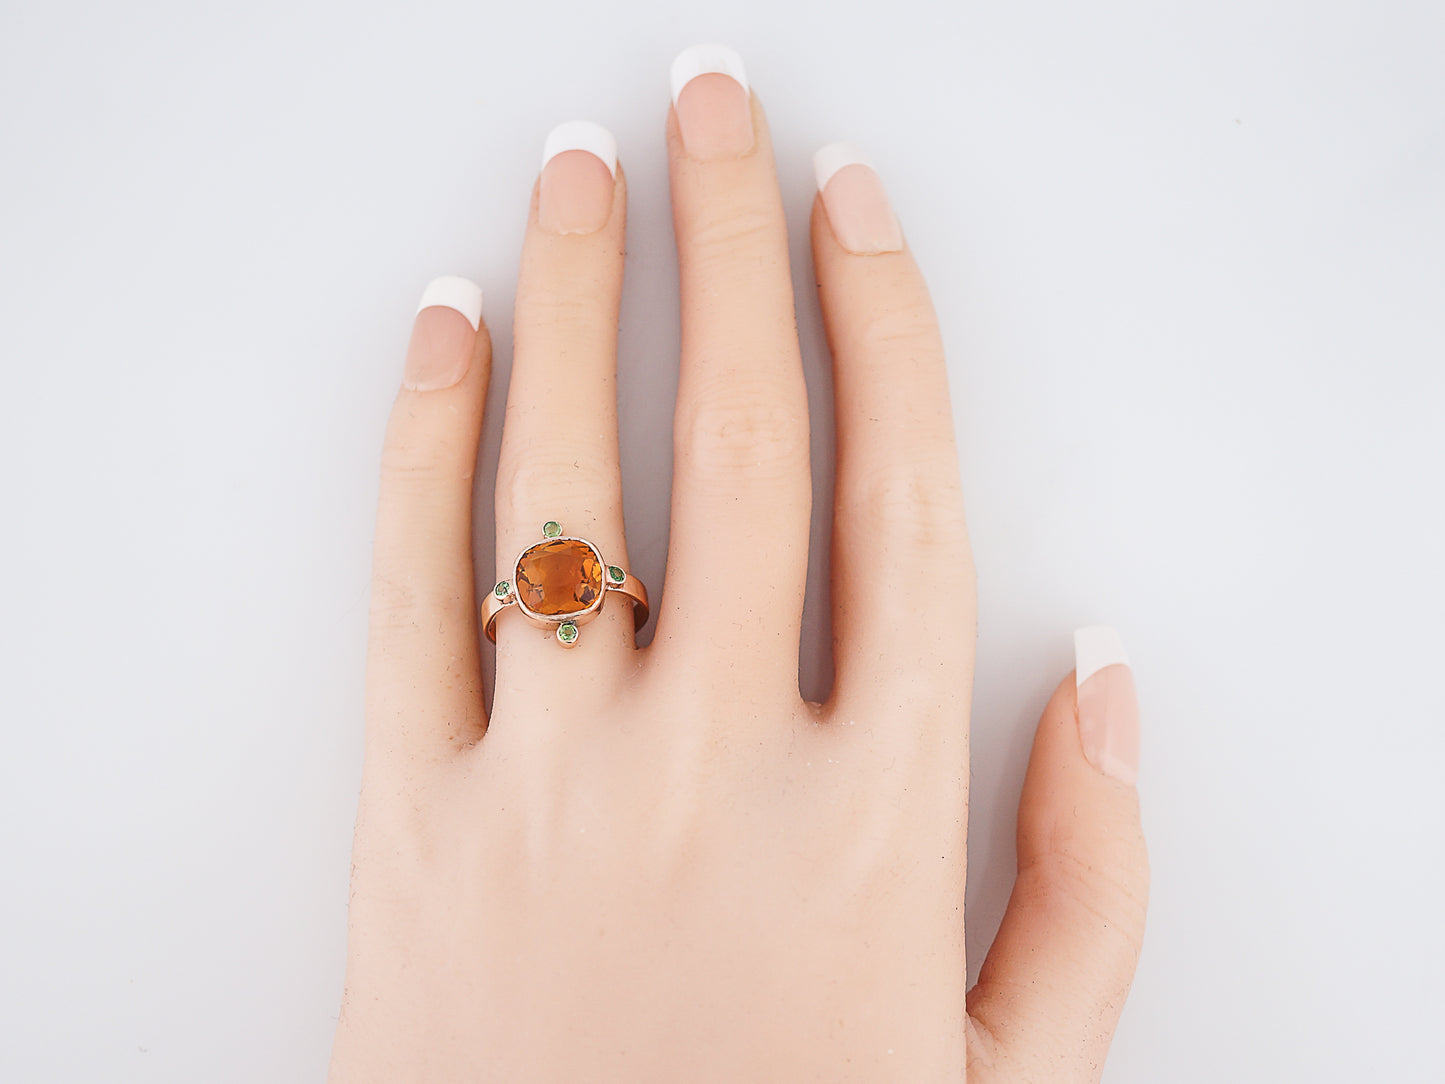 Vintage Right Hand Ring Retro 3.74 Cushion Cut Citrine in 9k Rose Gold